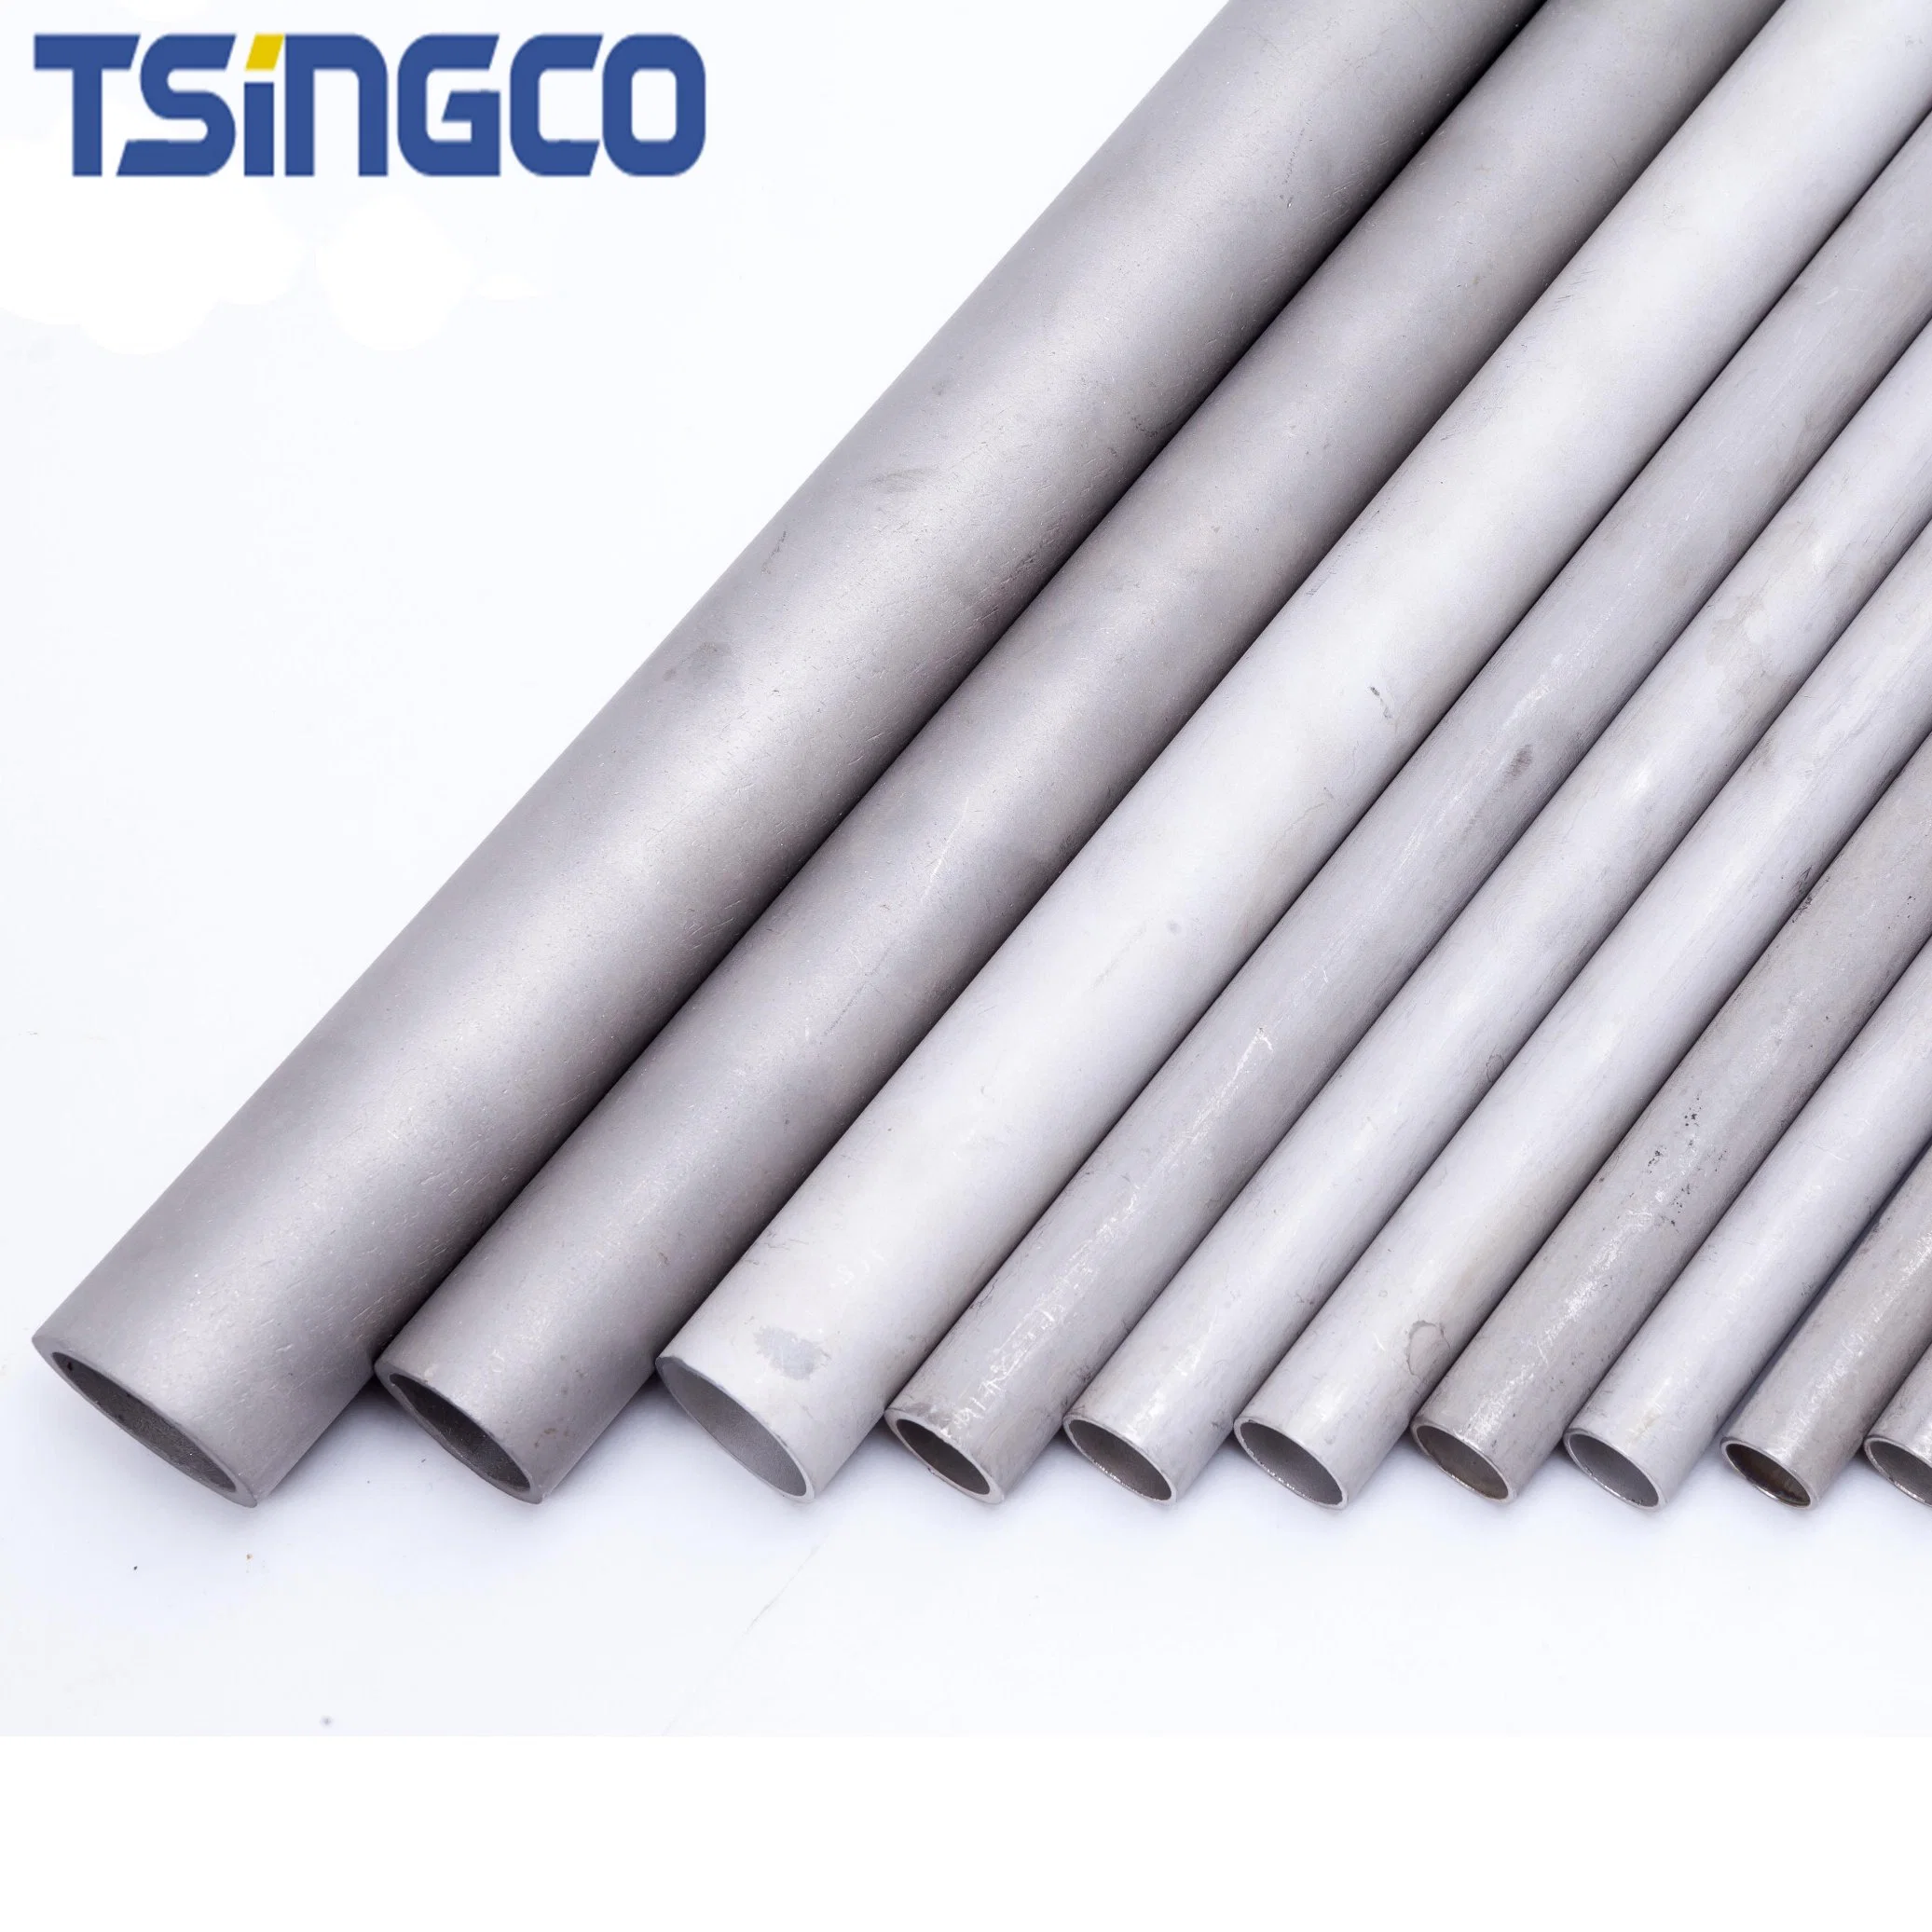 ASME/ASTM 2205/310S/S32205/2507/904L Cold Drawn Duplex Steel Pipes Seamless Tube with ISO Verification